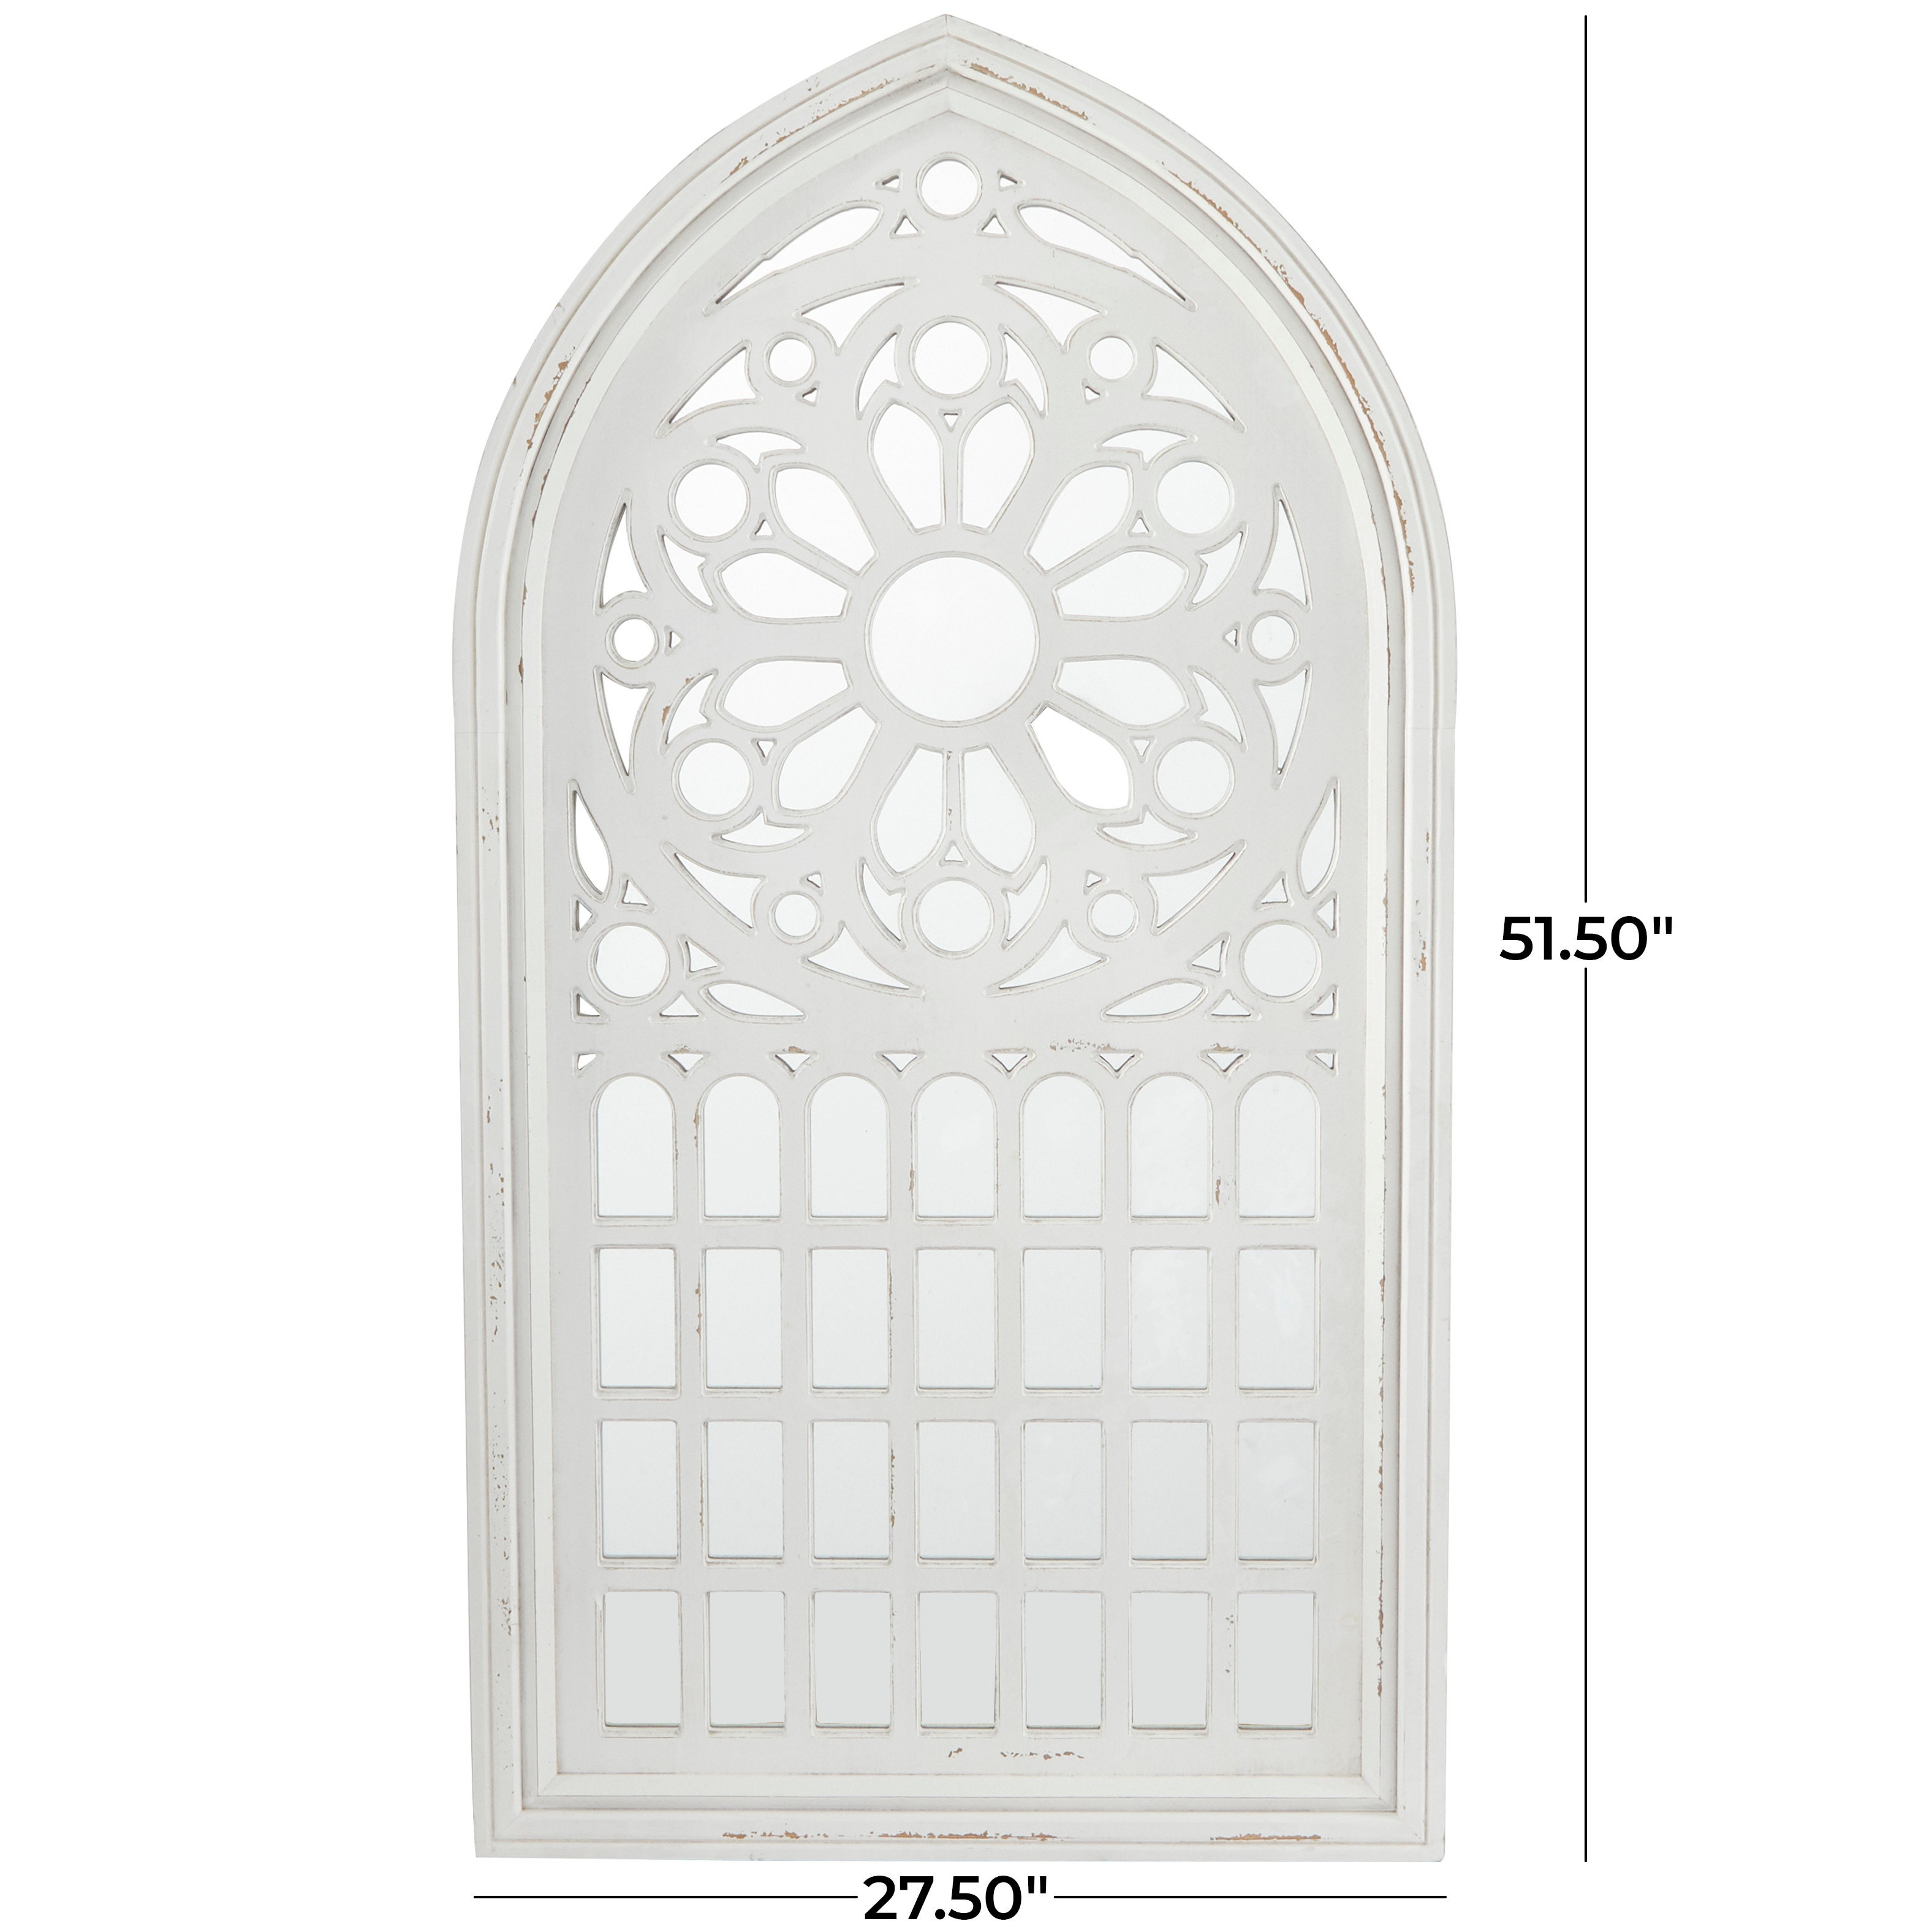 White Wood Carved Wall Mirror with Arched Window Panes - 1.60W x 27.50L x 51.50L